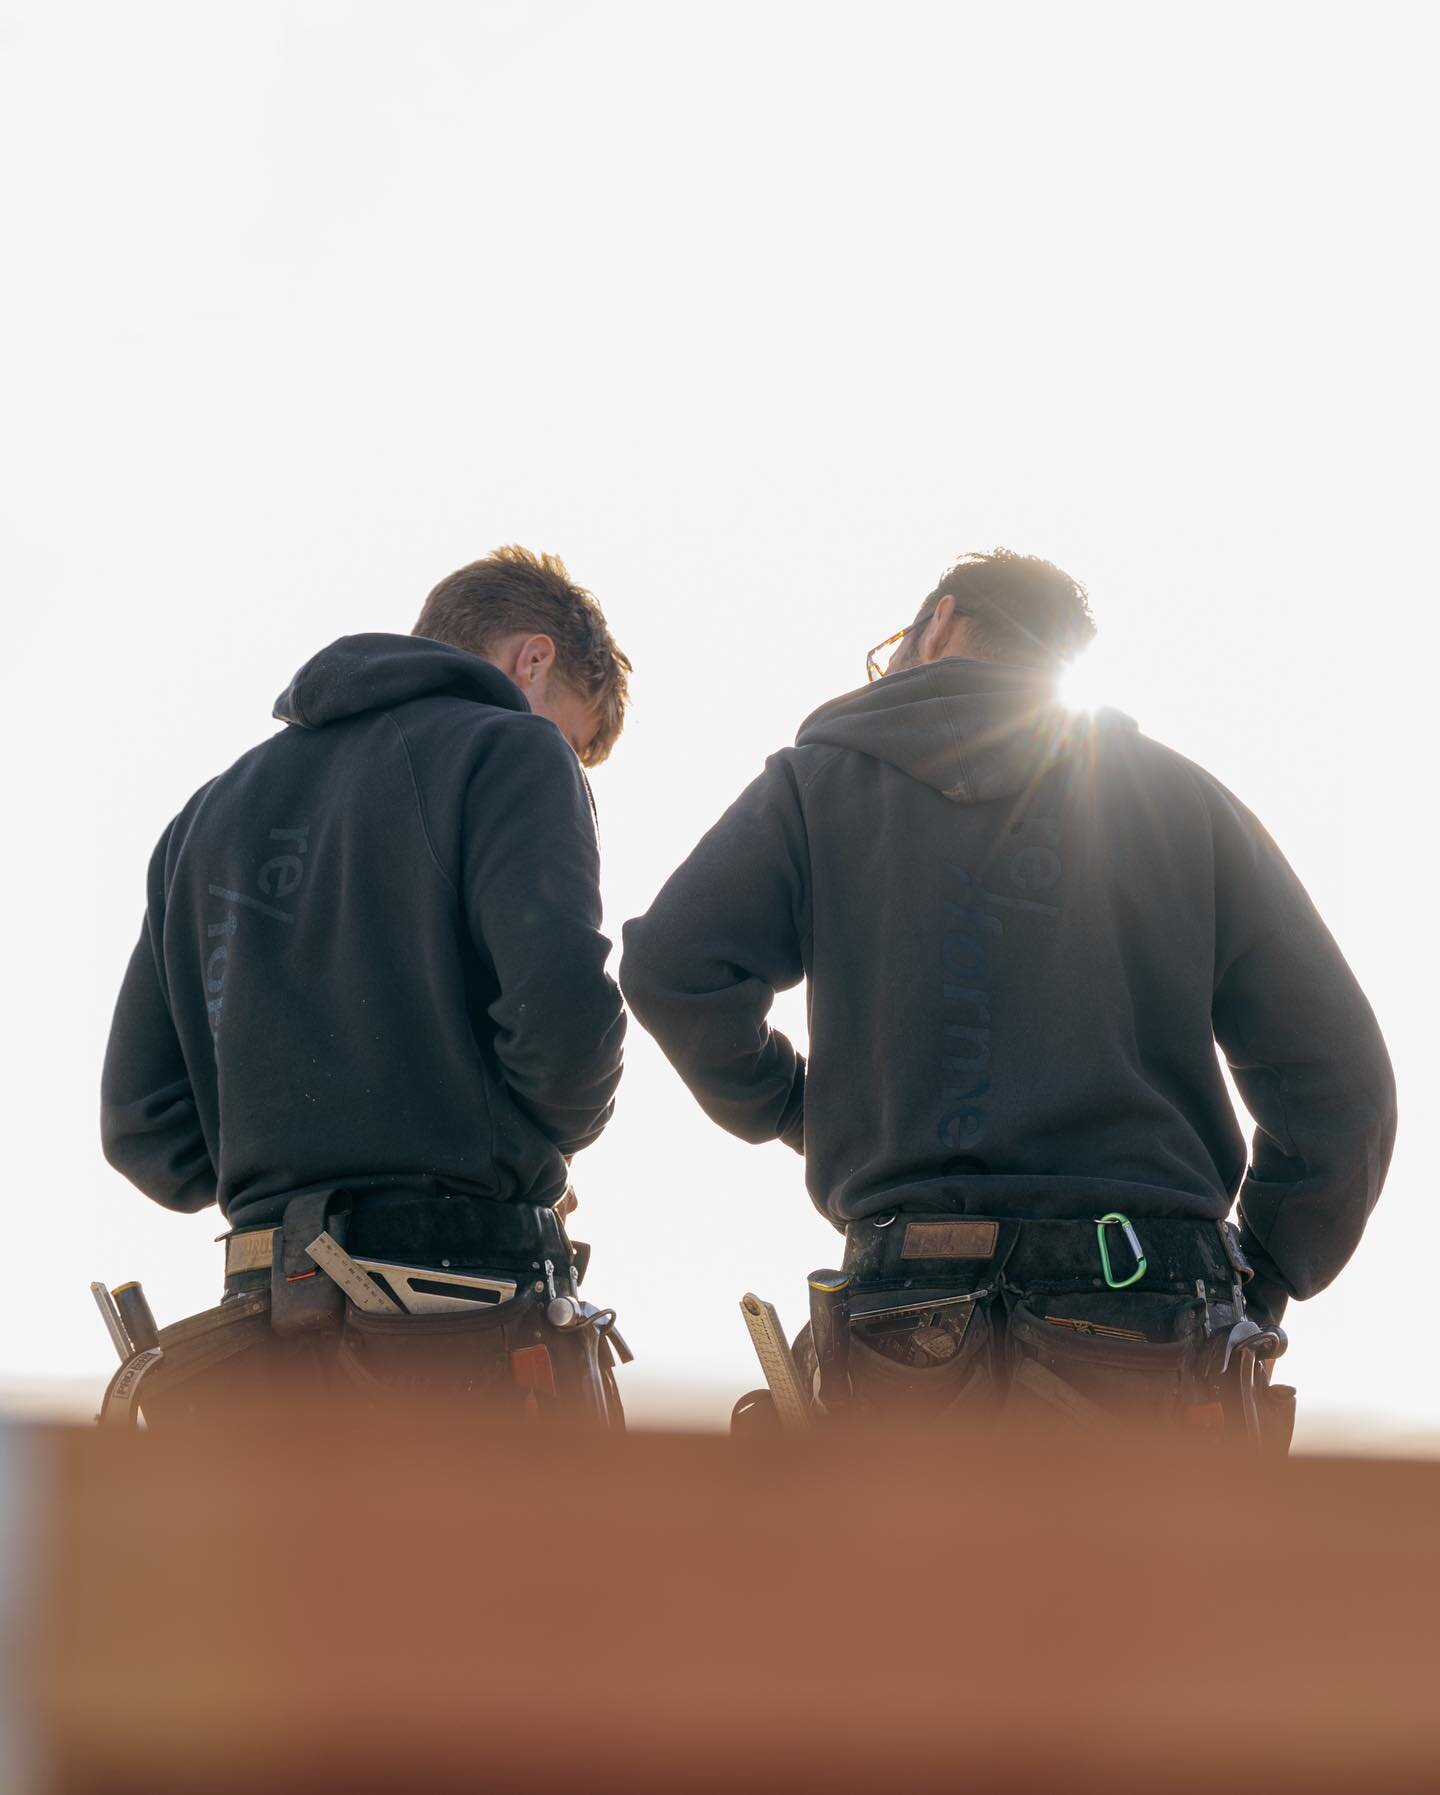 Smaller jobs usually coincide with working in your home while you're potentially still living there, which means you need to ensure the builders you hire are professional and polite. You can count on us to have both of those qualities!